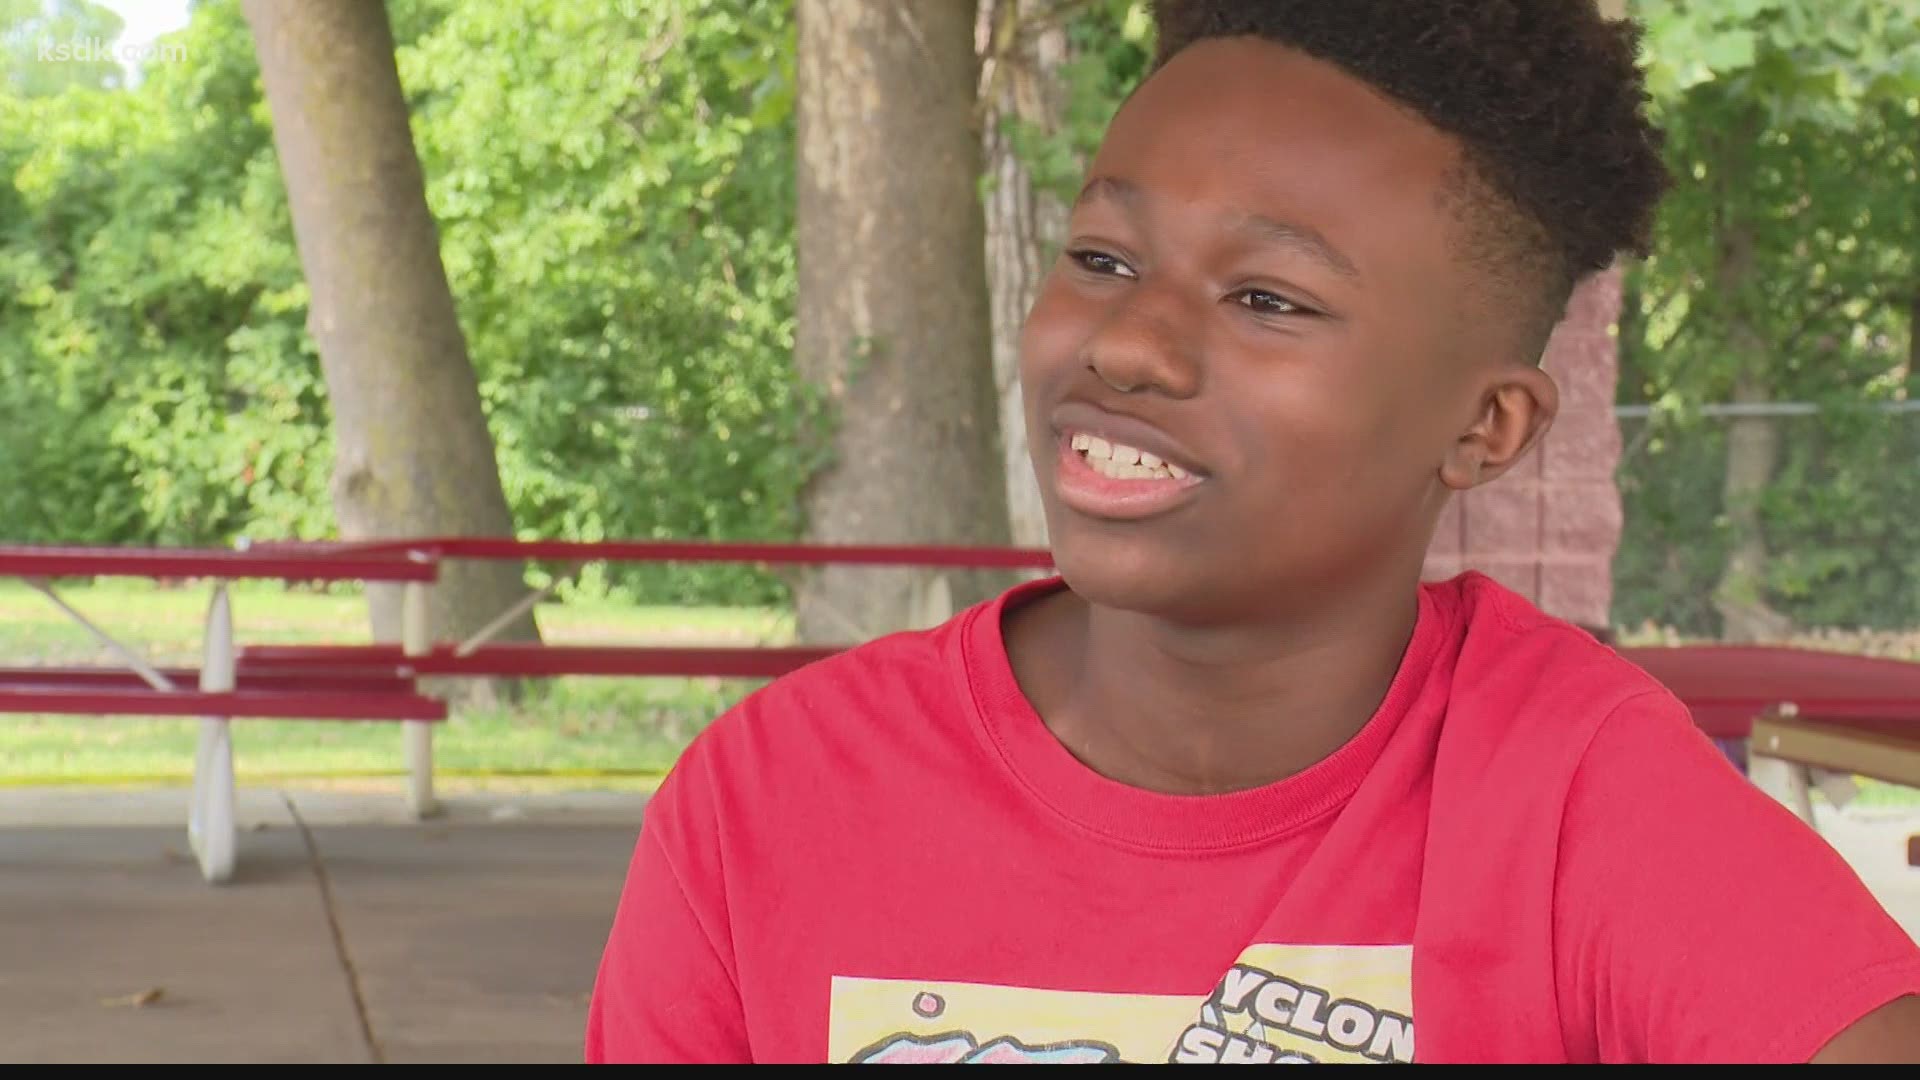 An eighth grader just published his first comic book. Messiah Sampson includes a message of inspiration on the pages.